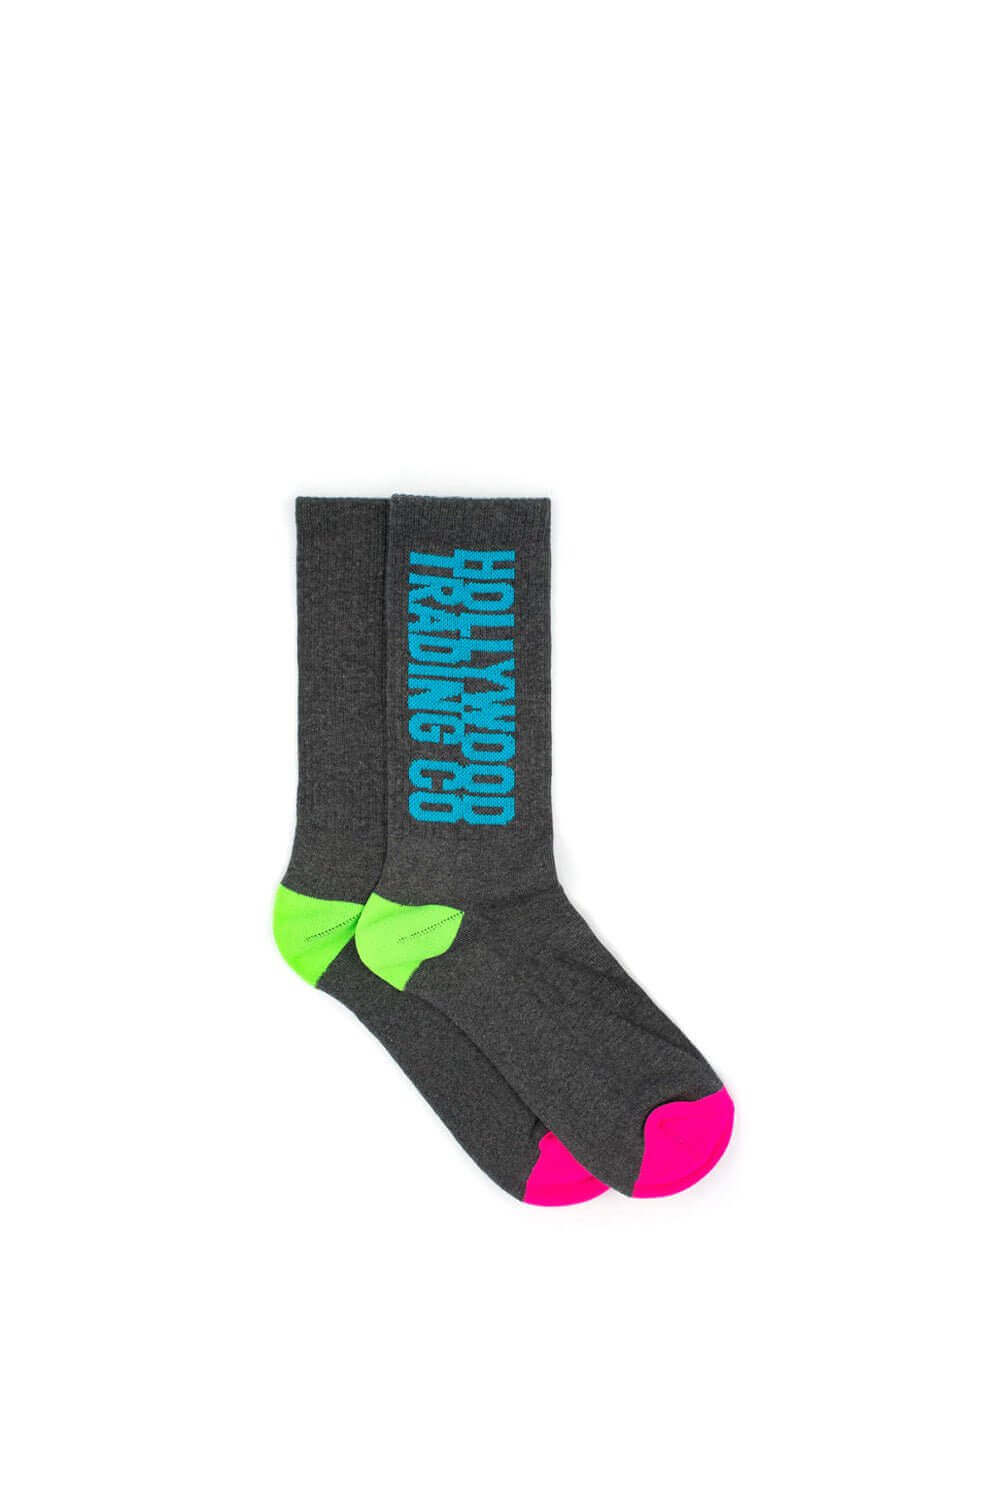 HOLLYWOOD T.C. WOMAN SOCKS Signature woman socks with Hollywood Trading Co script logo. 85% Cotton 10% Polyamide 5% Elastane. Made in Italy HTC LOS ANGELES